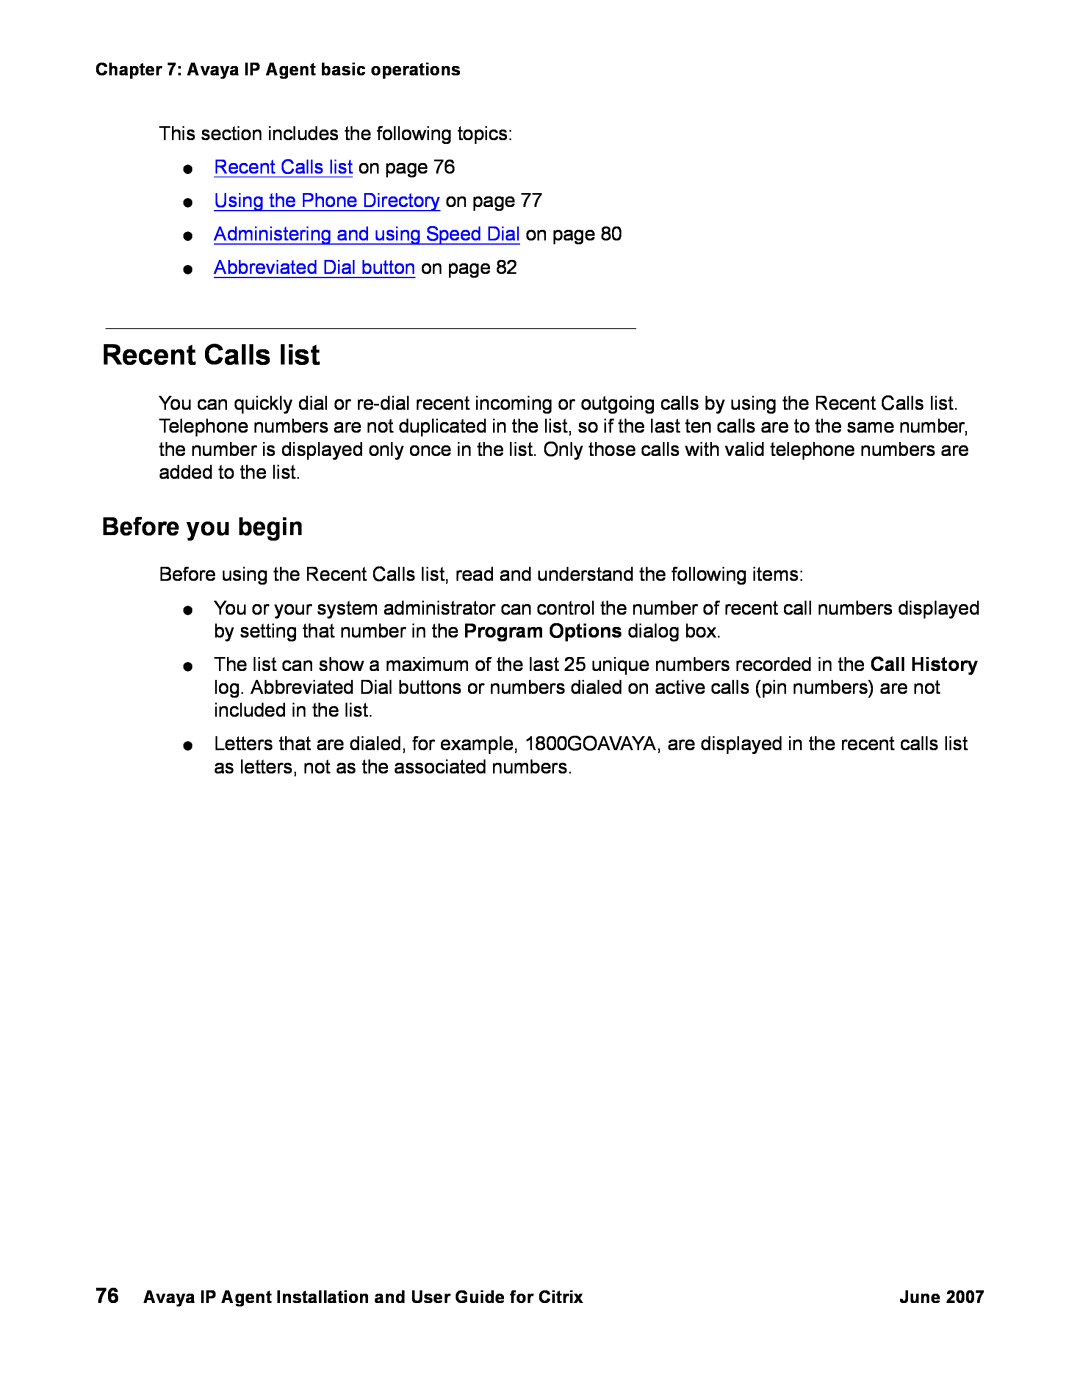 Avaya 7 manual Recent Calls list on page Using the Phone Directory on page, Administering and using Speed Dial on page 